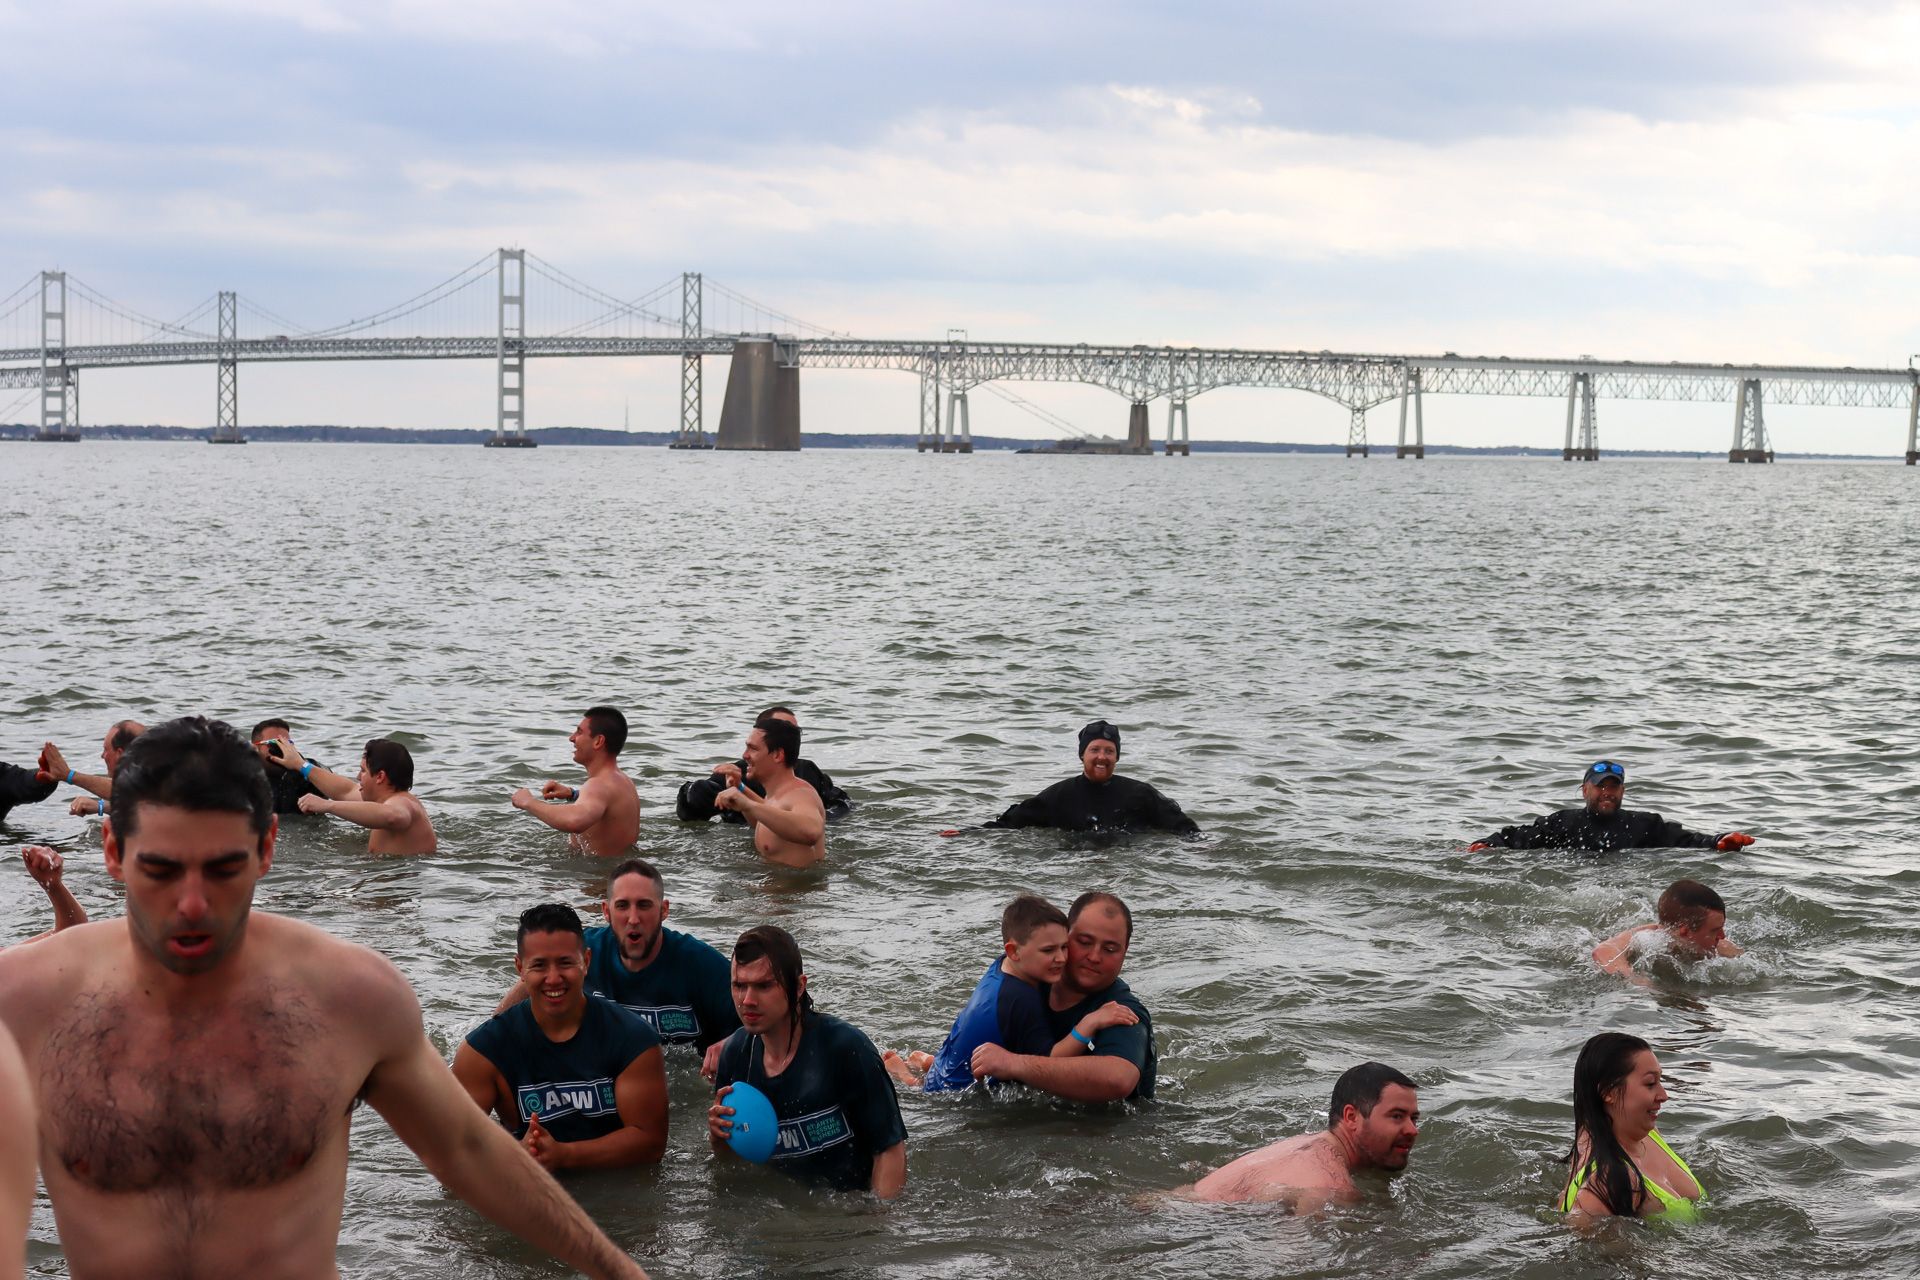 Oh that's cold - Save the children - Atlantic Pressure Washers - 2022 Polar Bear Plunge photo 8